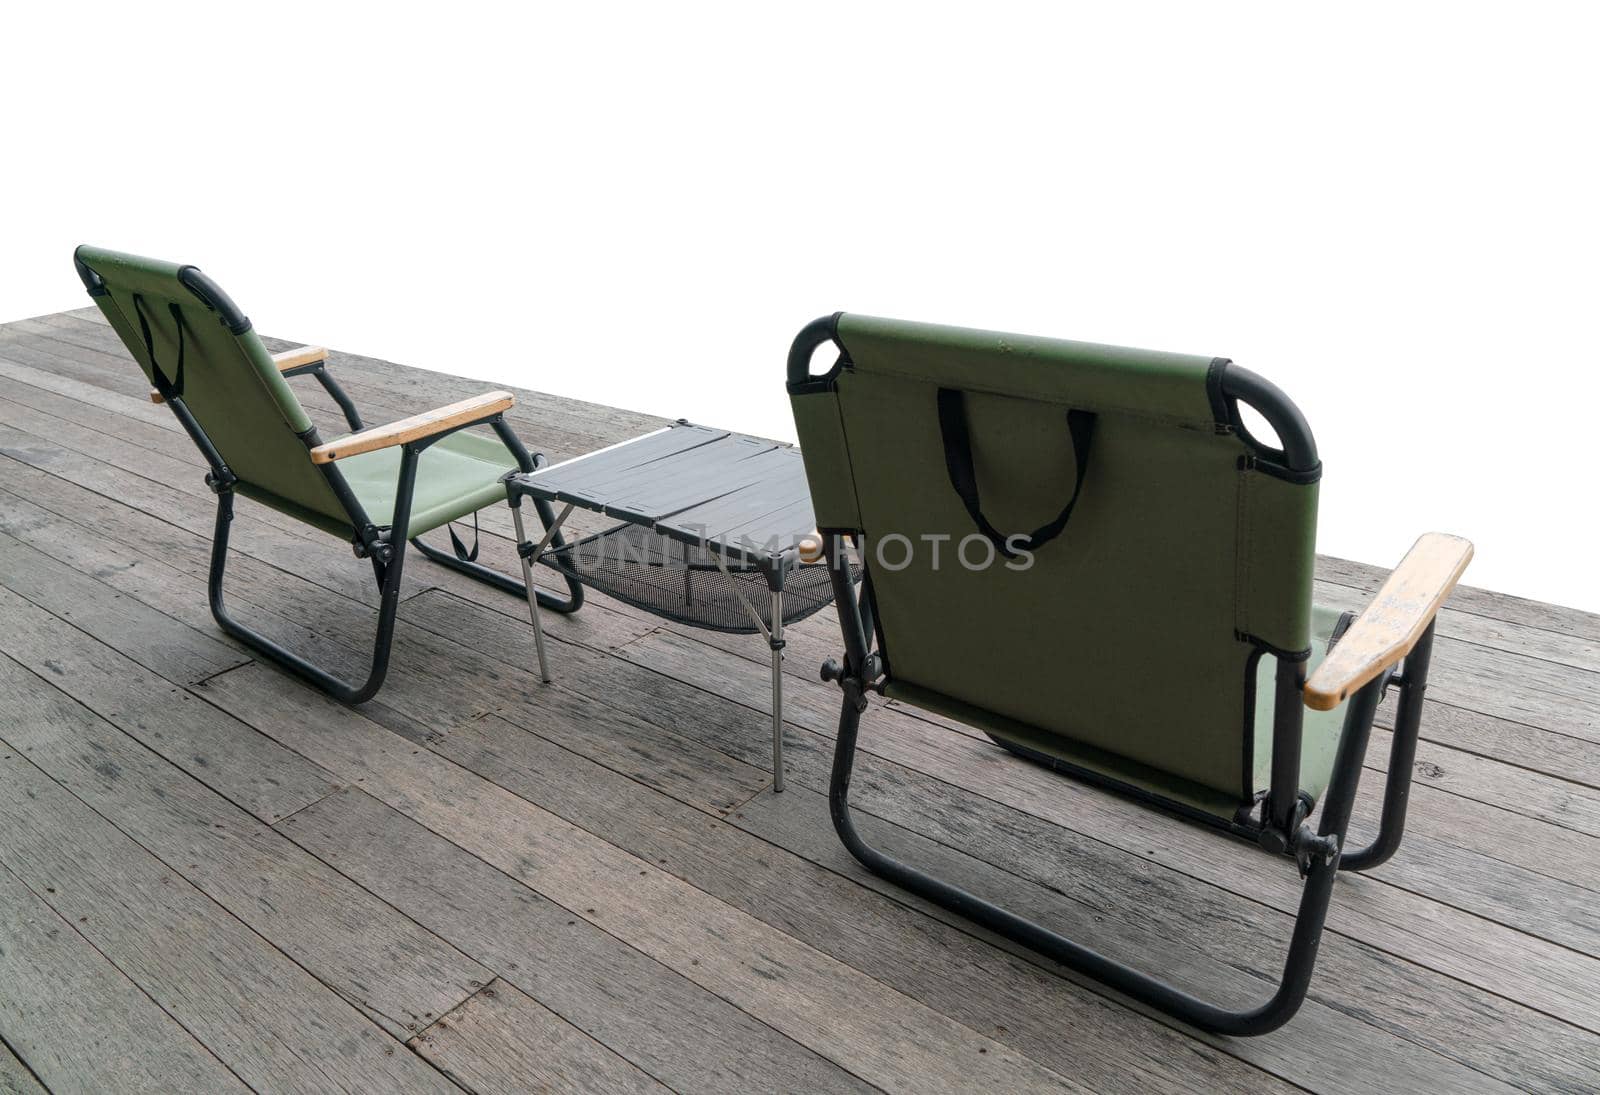 Outdoor camping seats and camping chairs and tables on isolated white. by Buttus_casso